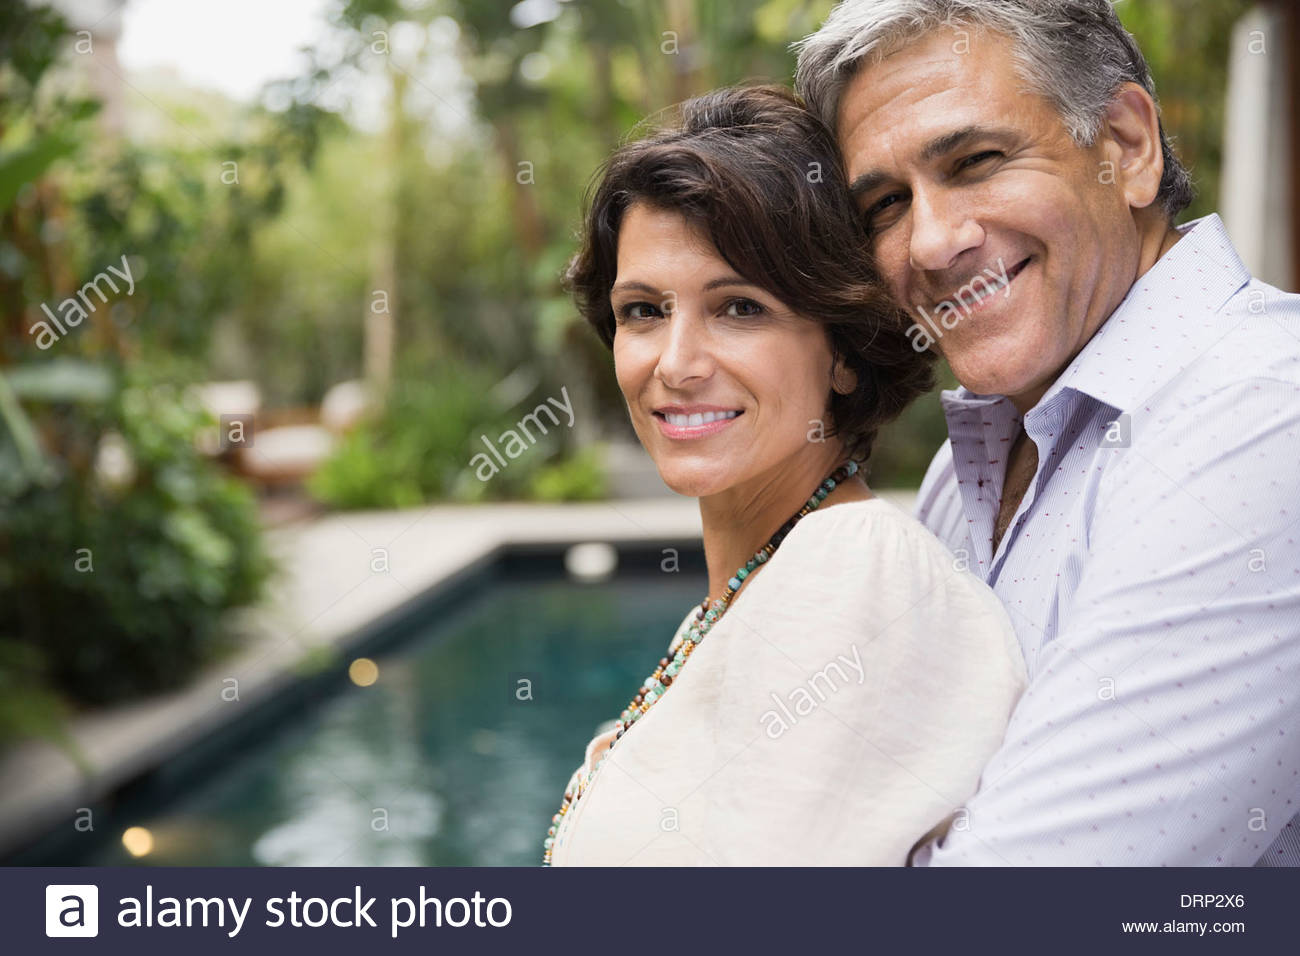 Portrait of mature couple standing outdoors Stock Photo